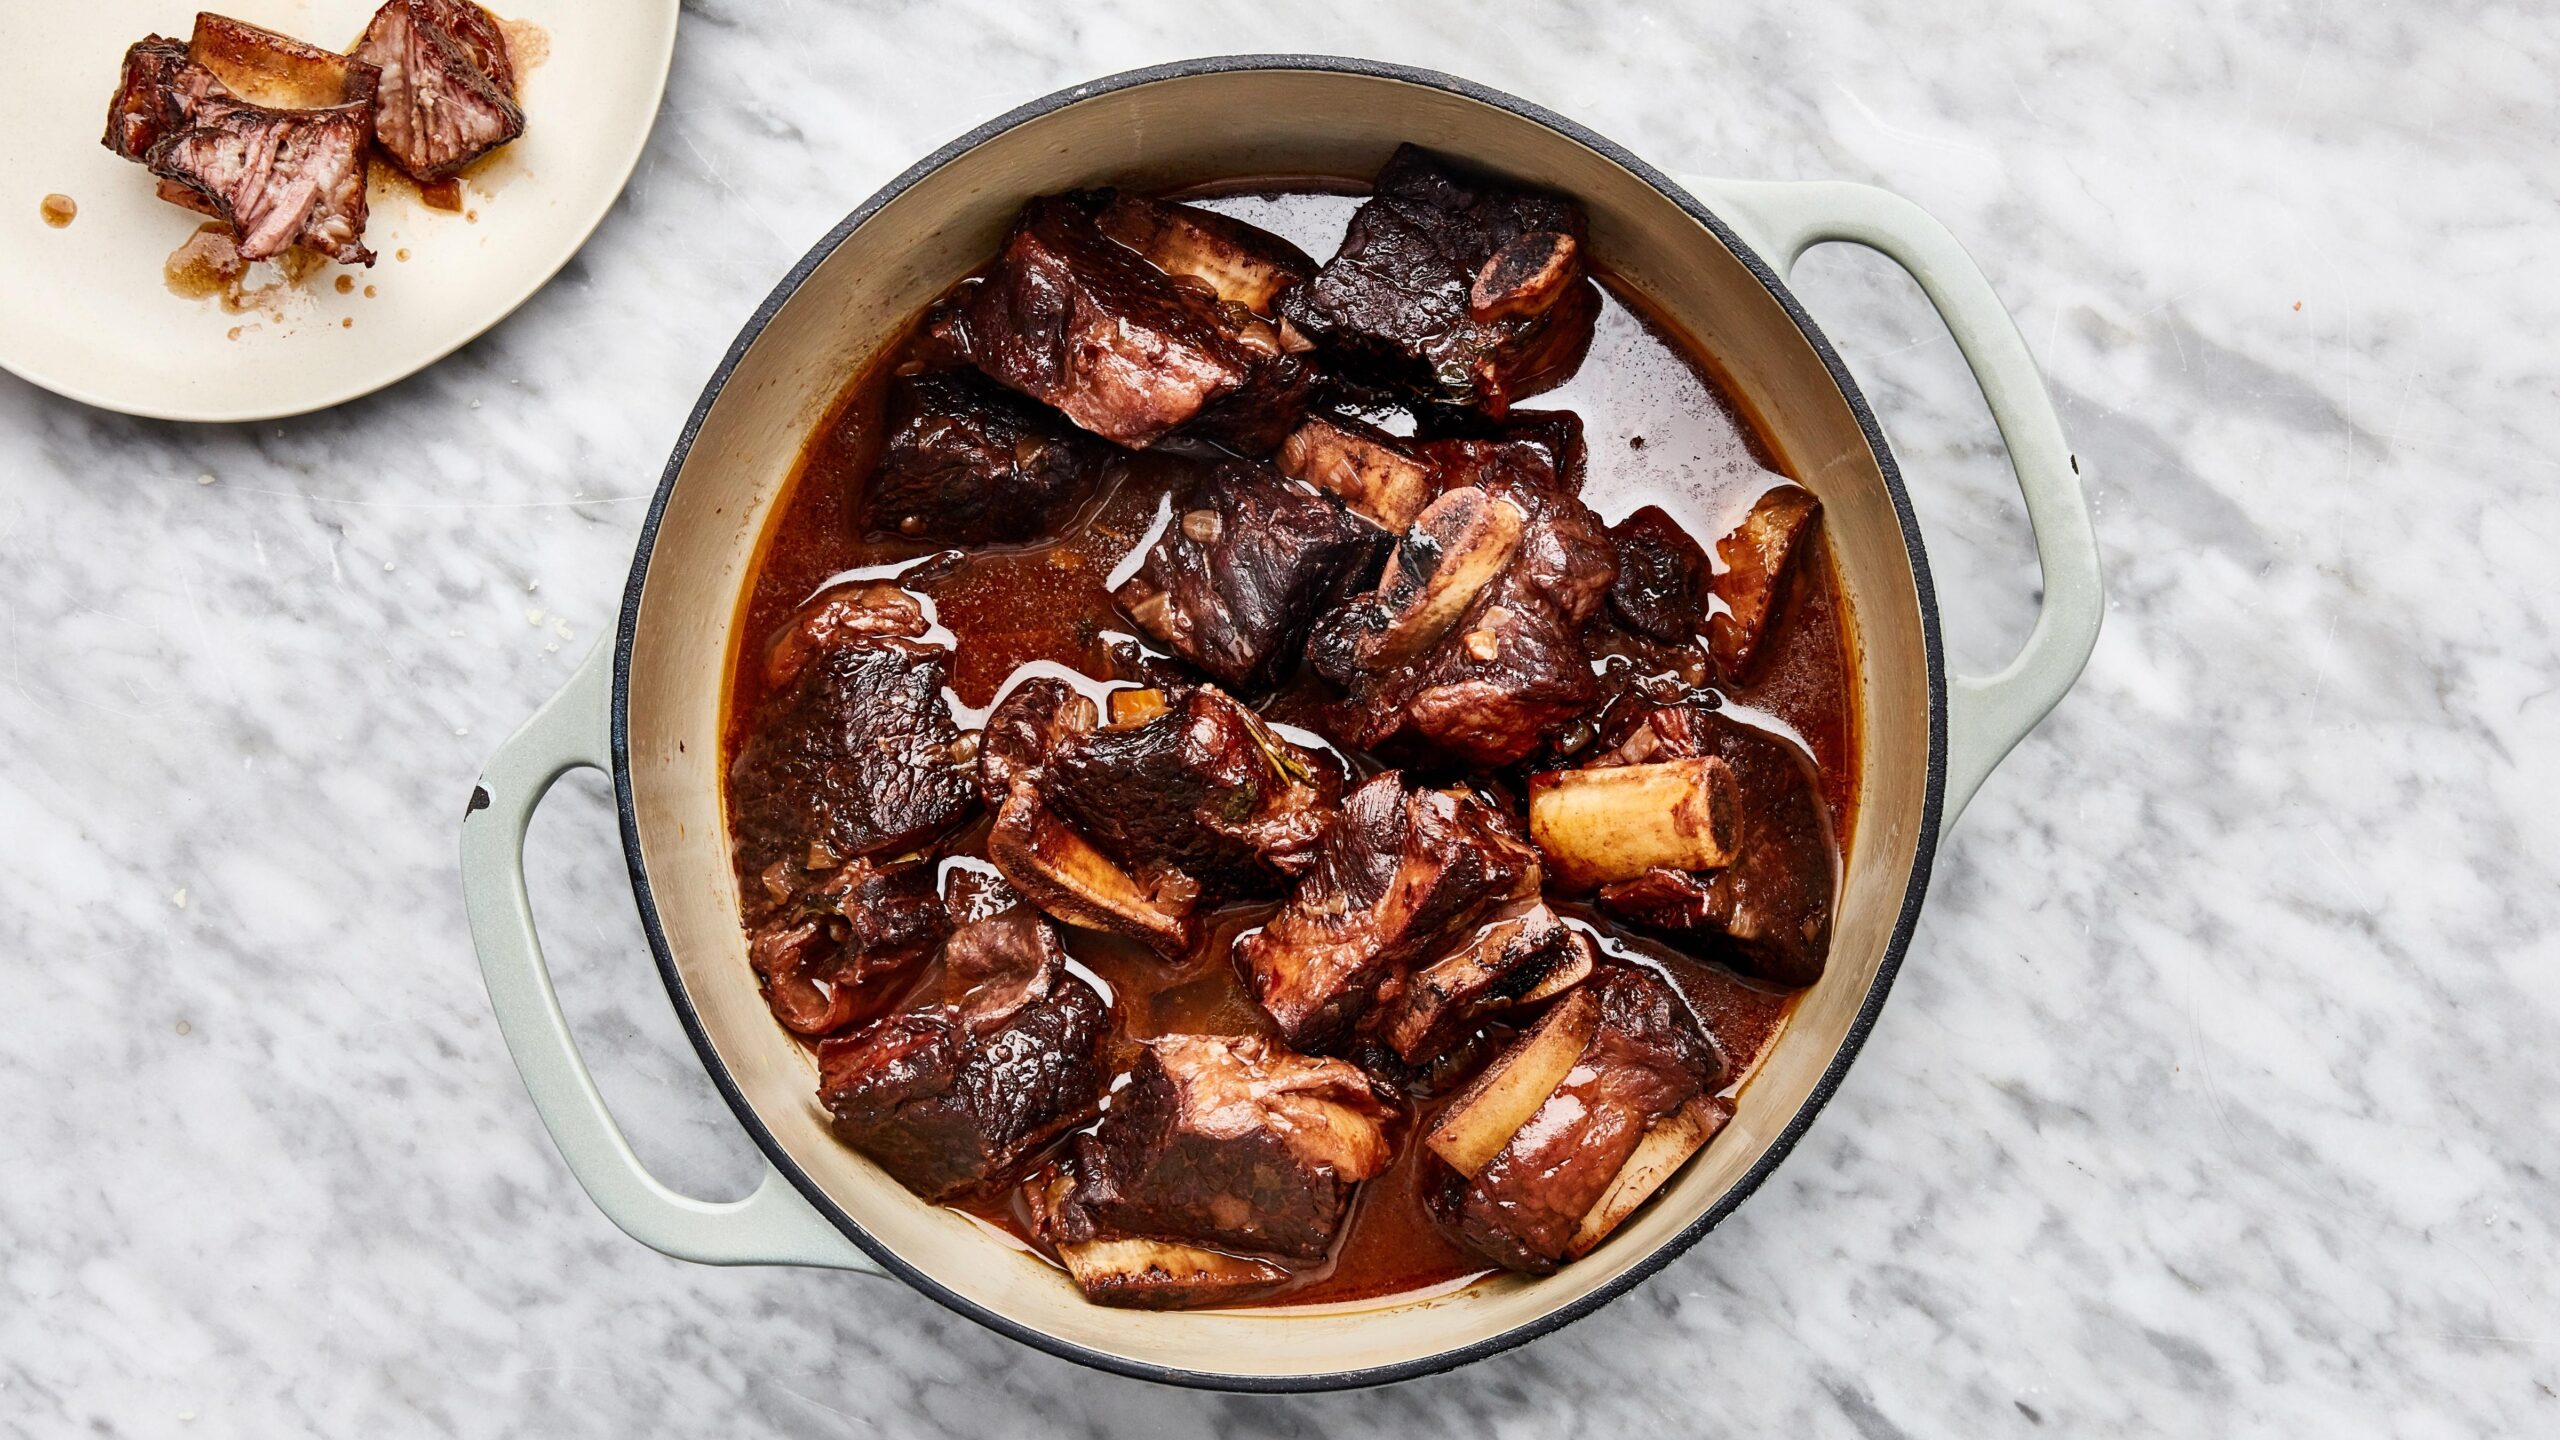  Sink your teeth into tender, succulent red wine braised short ribs.